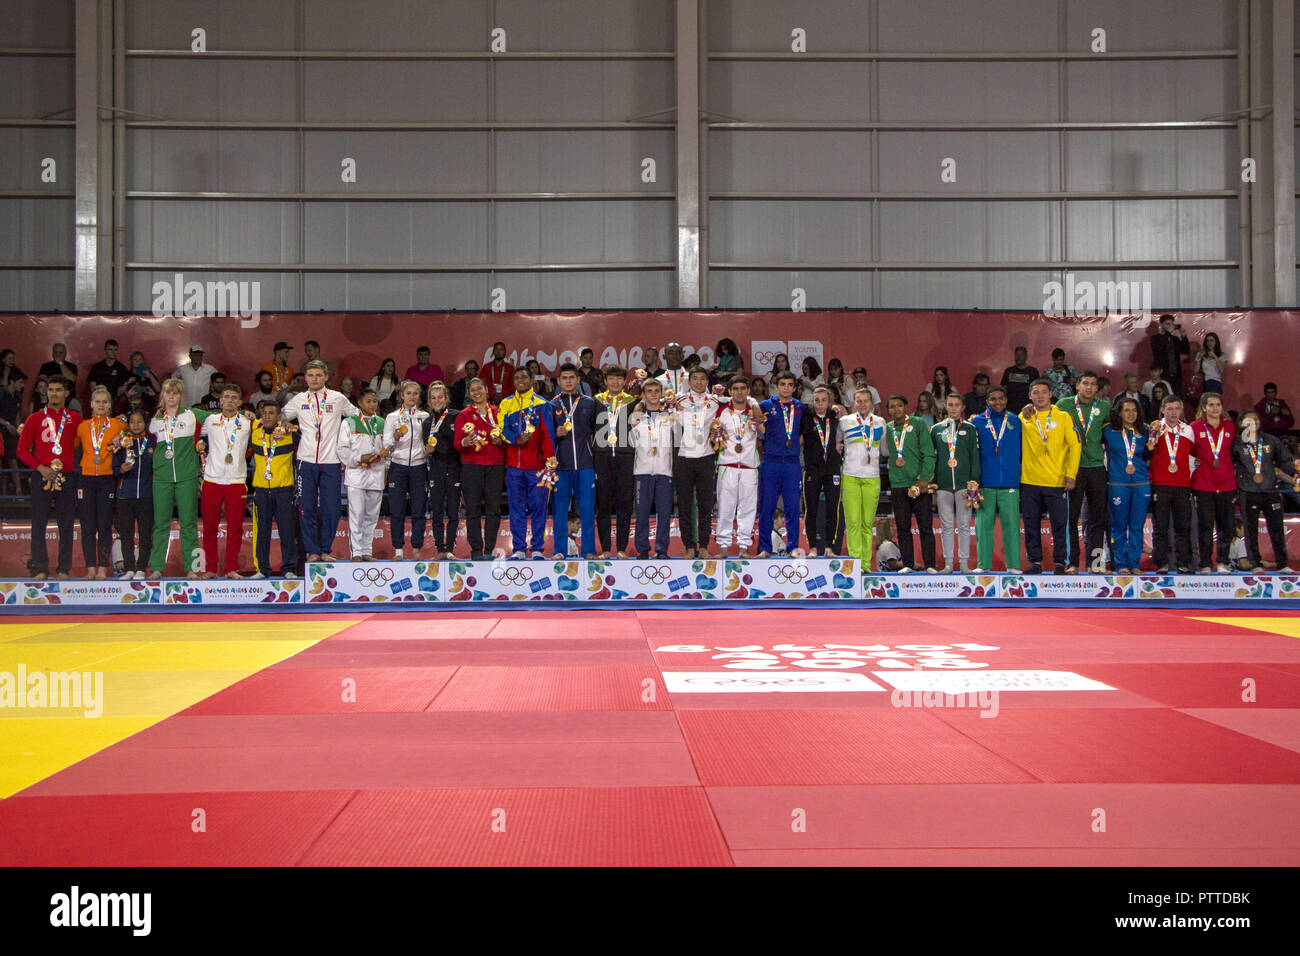 Buenos Aires, Buenos Aires, Argentina. 10th Oct, 2018. The fourth and final day of judo in Buenos Aires 2018 had mixed team competition, where boys and girls from different countries and continents competed as teams.The Beijing team consisting of Artsiom Kolasau (Belarus), Li Ling Liu (China Taipei), Jaykhunbek Nazarov (Uzbekistan), Carlos PÃ¡ez (Venezuela), Itzel Pecha (Mexico), Ana Viktorija Puljiz (Croatia) and VerÃ³nica Toniolo (Italy) were the members of the team that climbed to the top of the podium and received the gold medals on the tatami.Team competitions are promoted in the yo Stock Photo